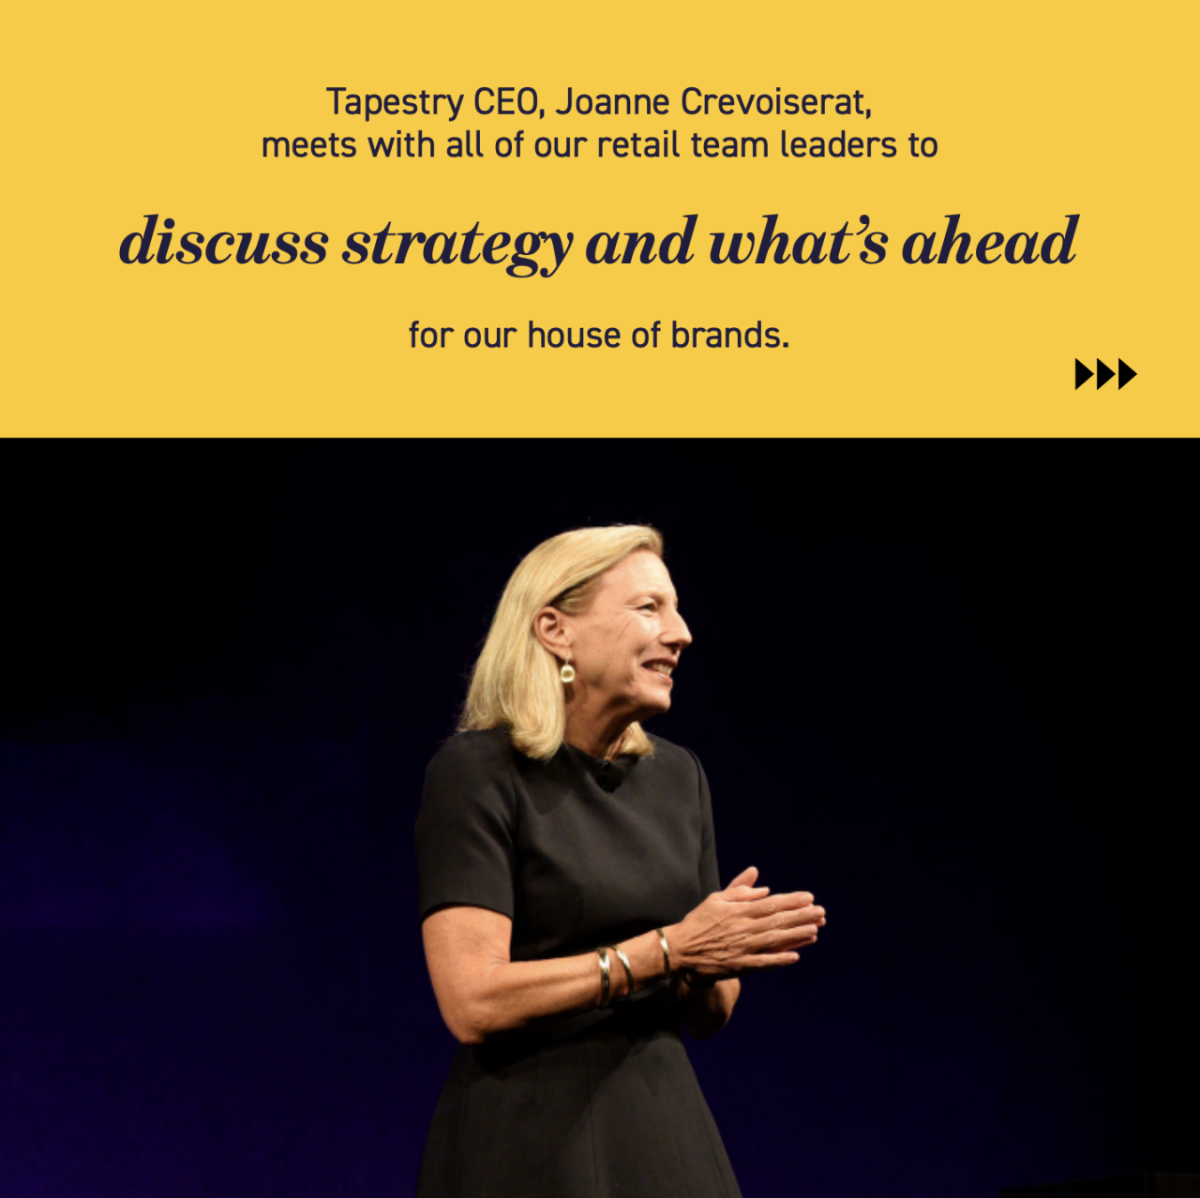 "Tapestry CEO, Joanne Crevoiserat, meets with all of our retail team leaders to discuss strategy and what's ahead for our house of brands."